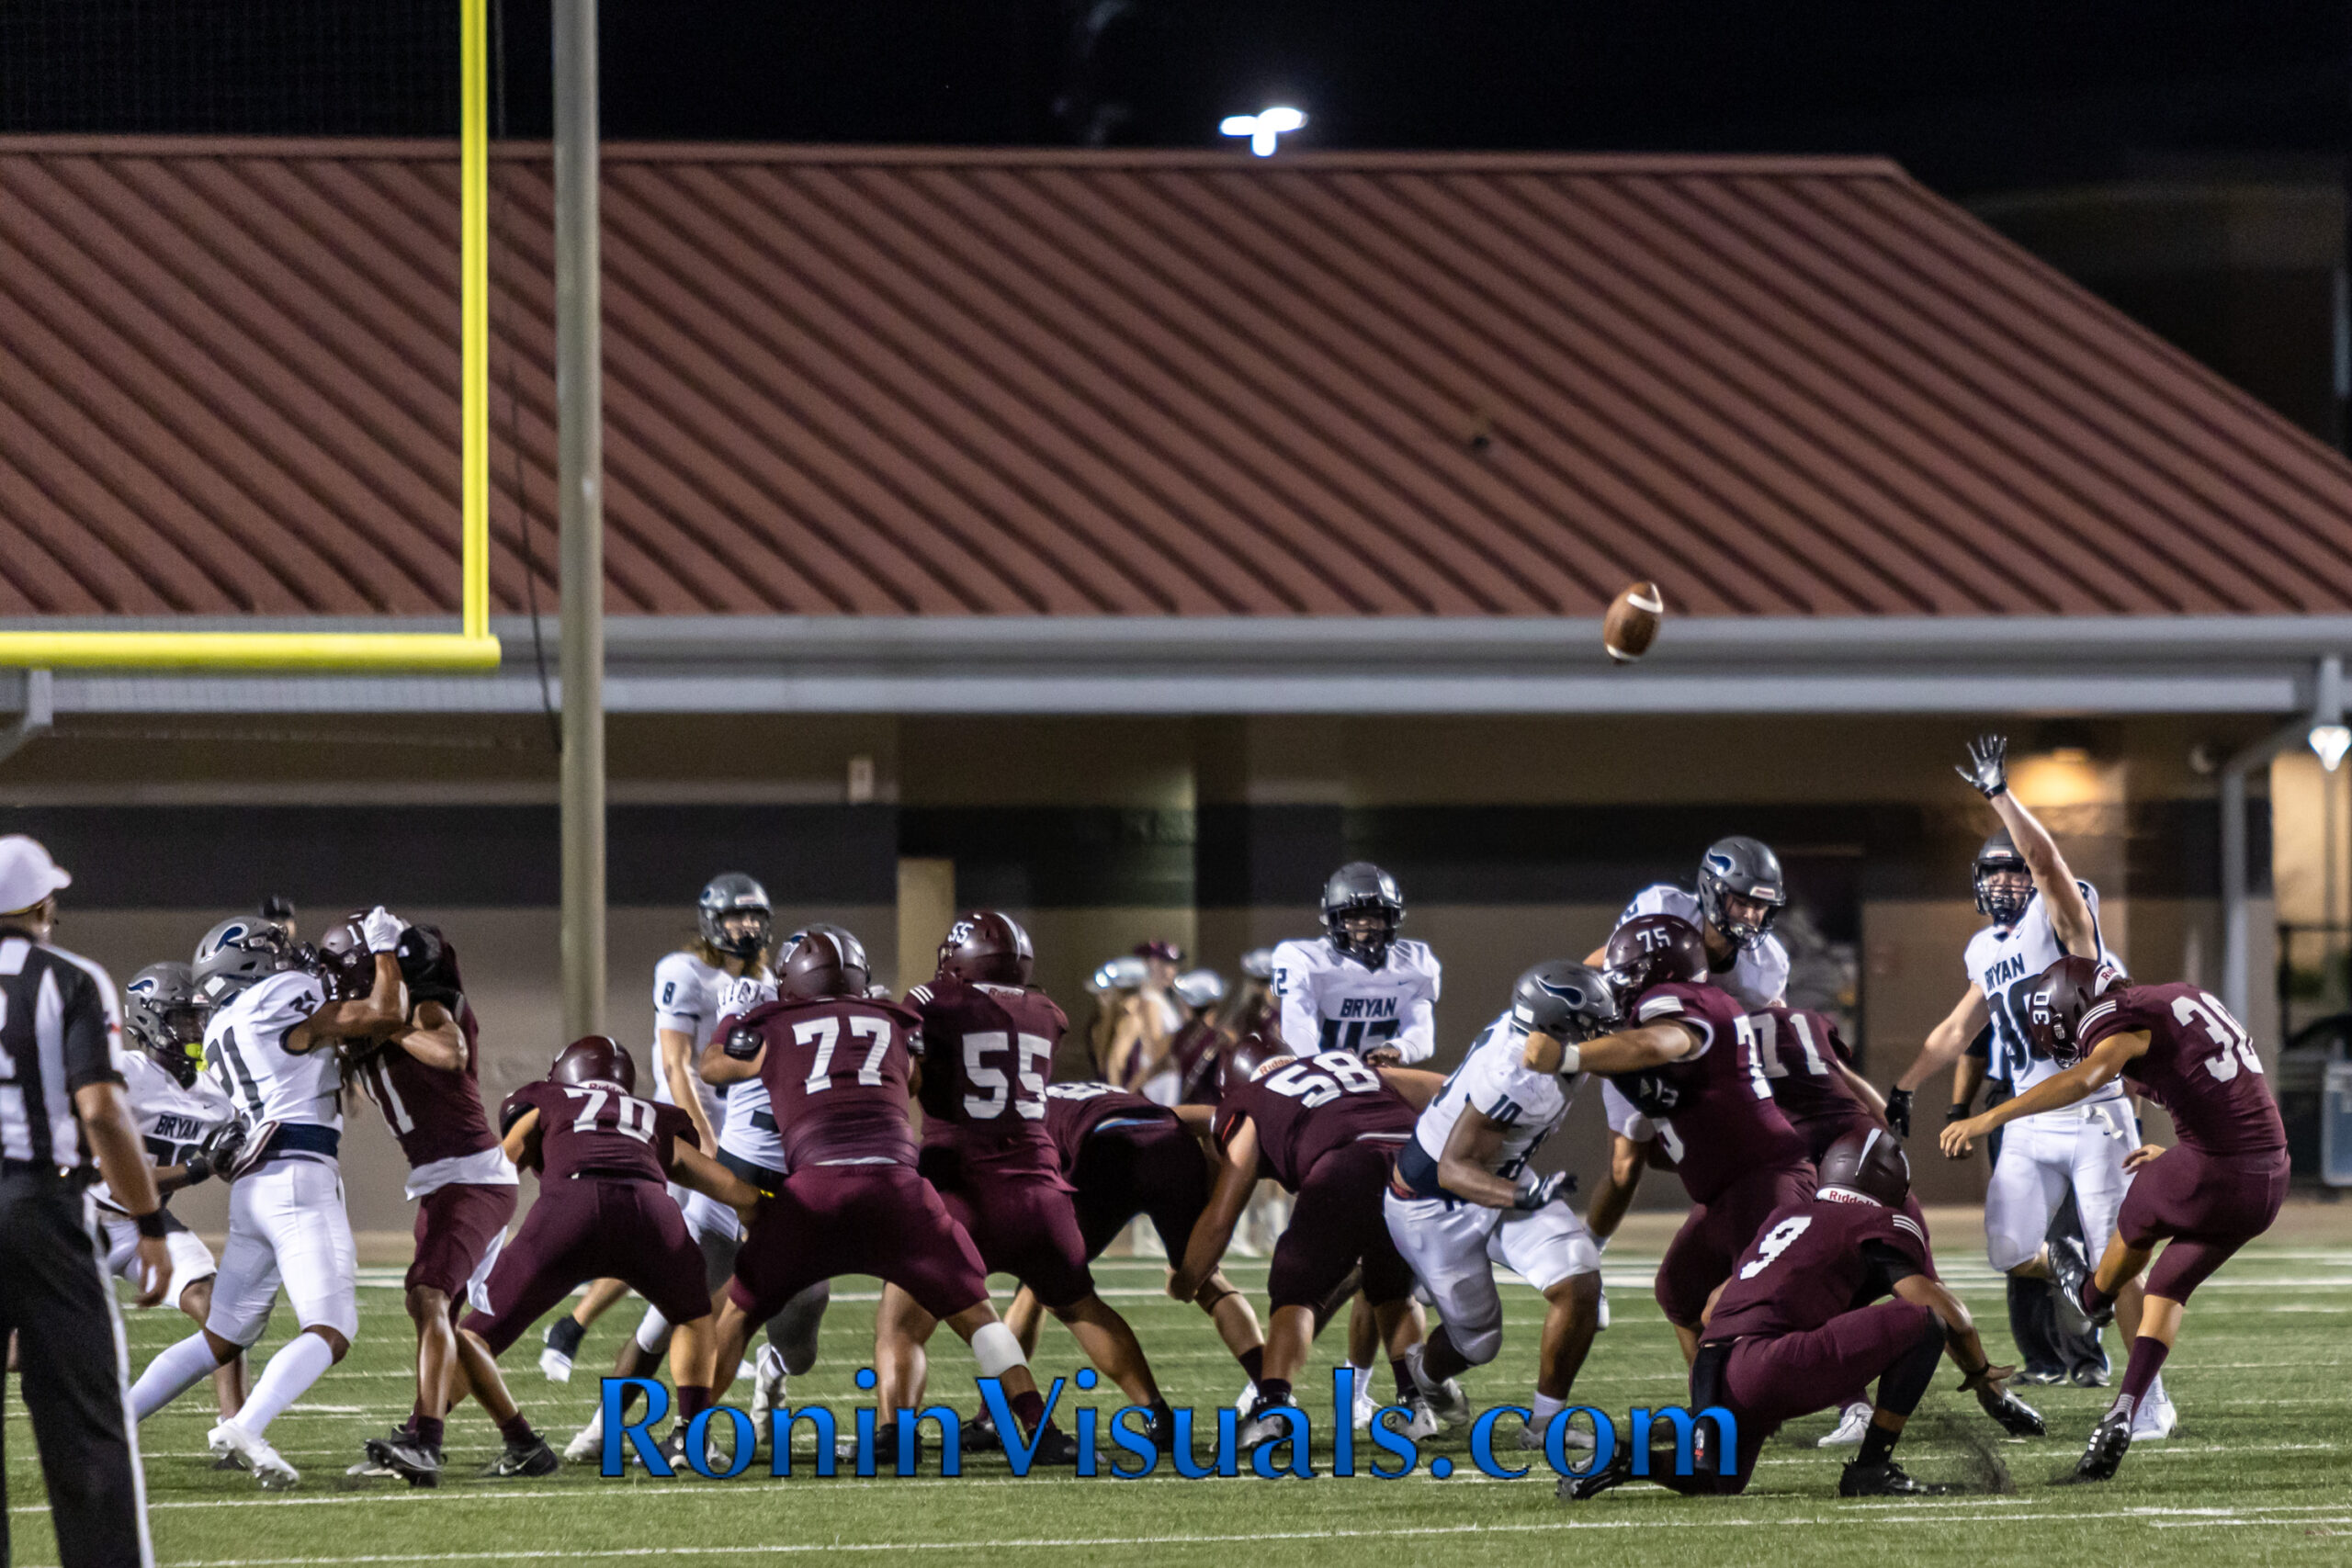 Joevan Ortiz (30) splits the uprights for his second field goal of the night, held by Jordan Duncan (9). The Waller Bulldog varsity team battles the Bryan Vikings, with the 21-6 decision favoring the Vikings. The Bulldogs next game will be against Mayde Creek in Katy ISD's Legacy Stadium. (photo courtesy RoninVisuals.com)